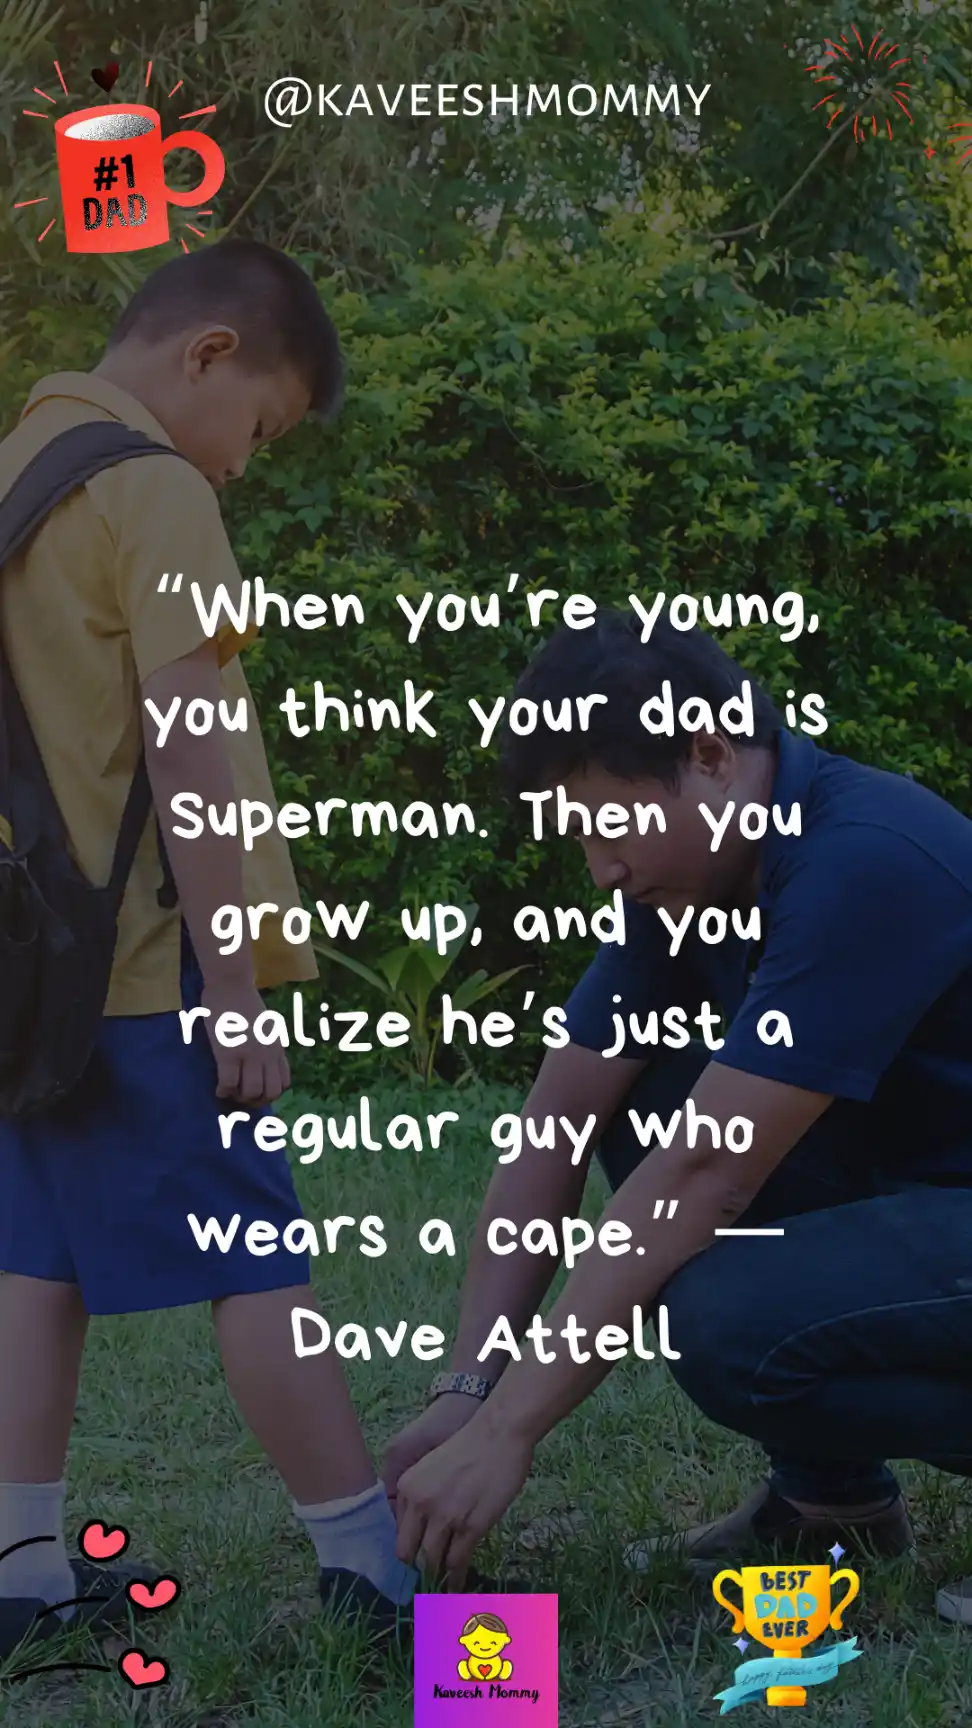 funny fathers day quotes for son-“When you’re young, you think your dad is Superman. Then you grow up, and you realize he’s just a regular guy who wears a cape.” —Dave Attell